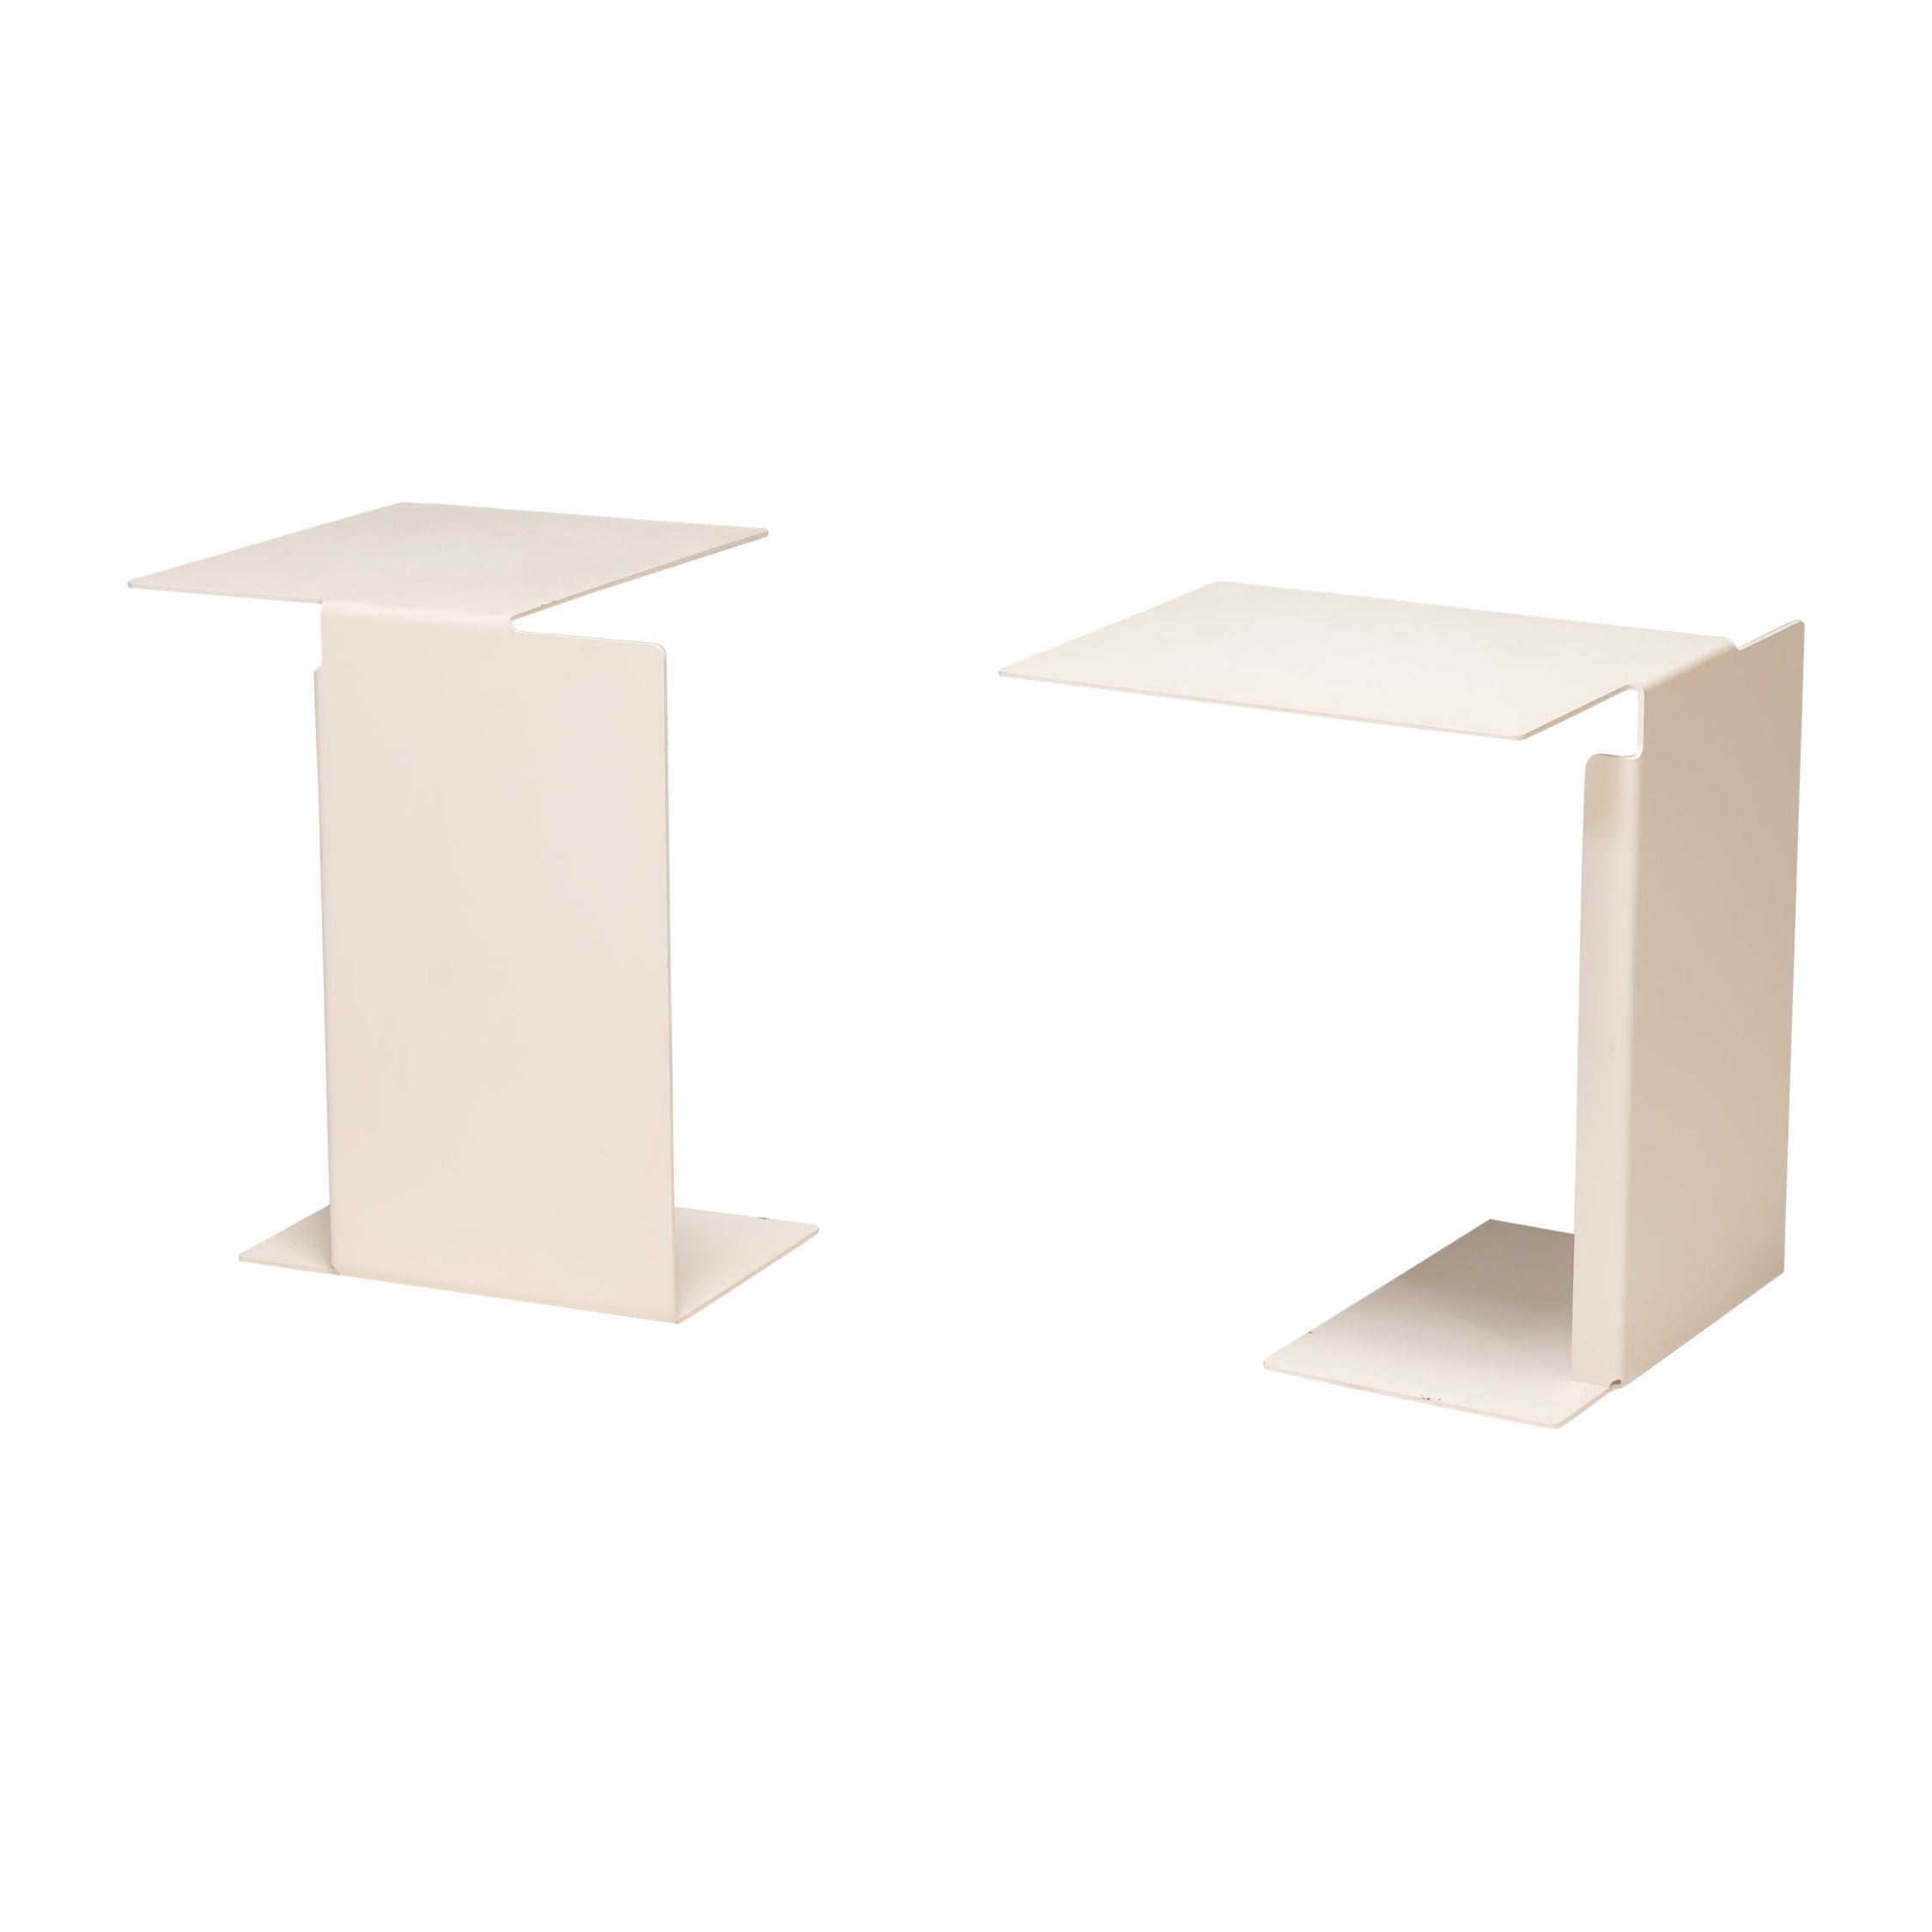 Konstantin Grcic for Classicon Diana B White Side Tables, Set of 2 For Sale